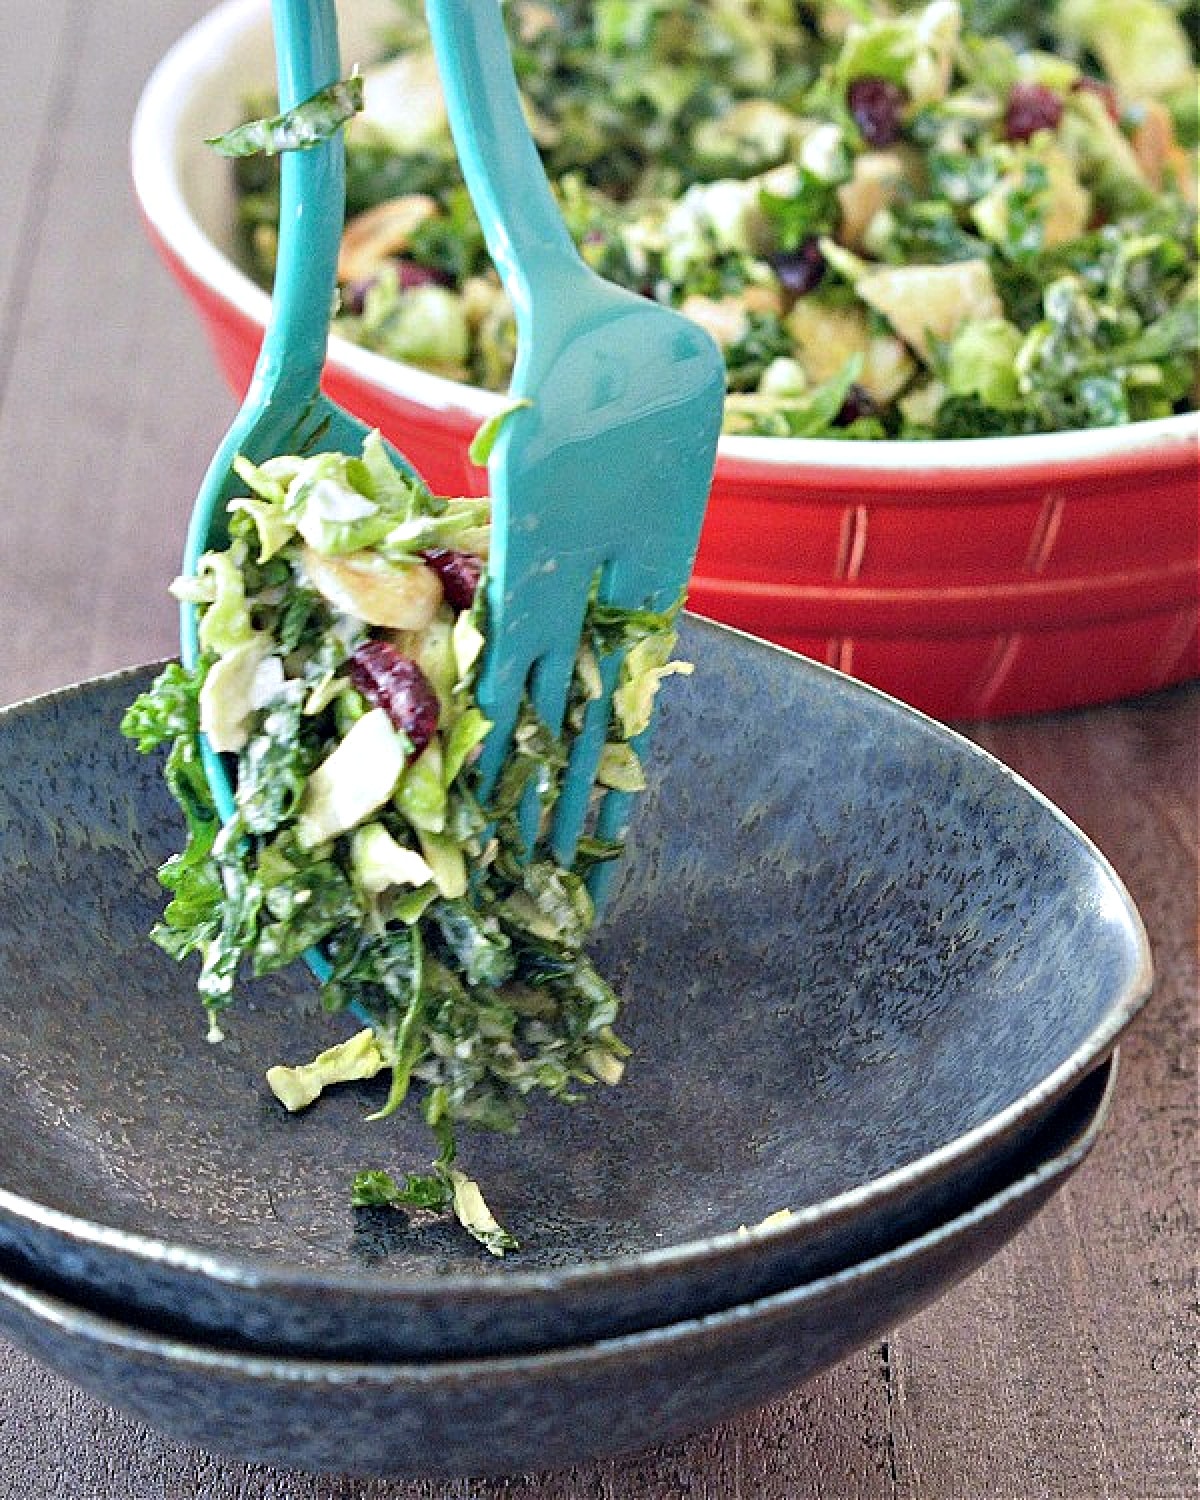 Lemon brussels and kale salad with cashews and dried cranberries being portioned into a bowl with turquoise serving utensils, with the large red serving bowl of salad in background.